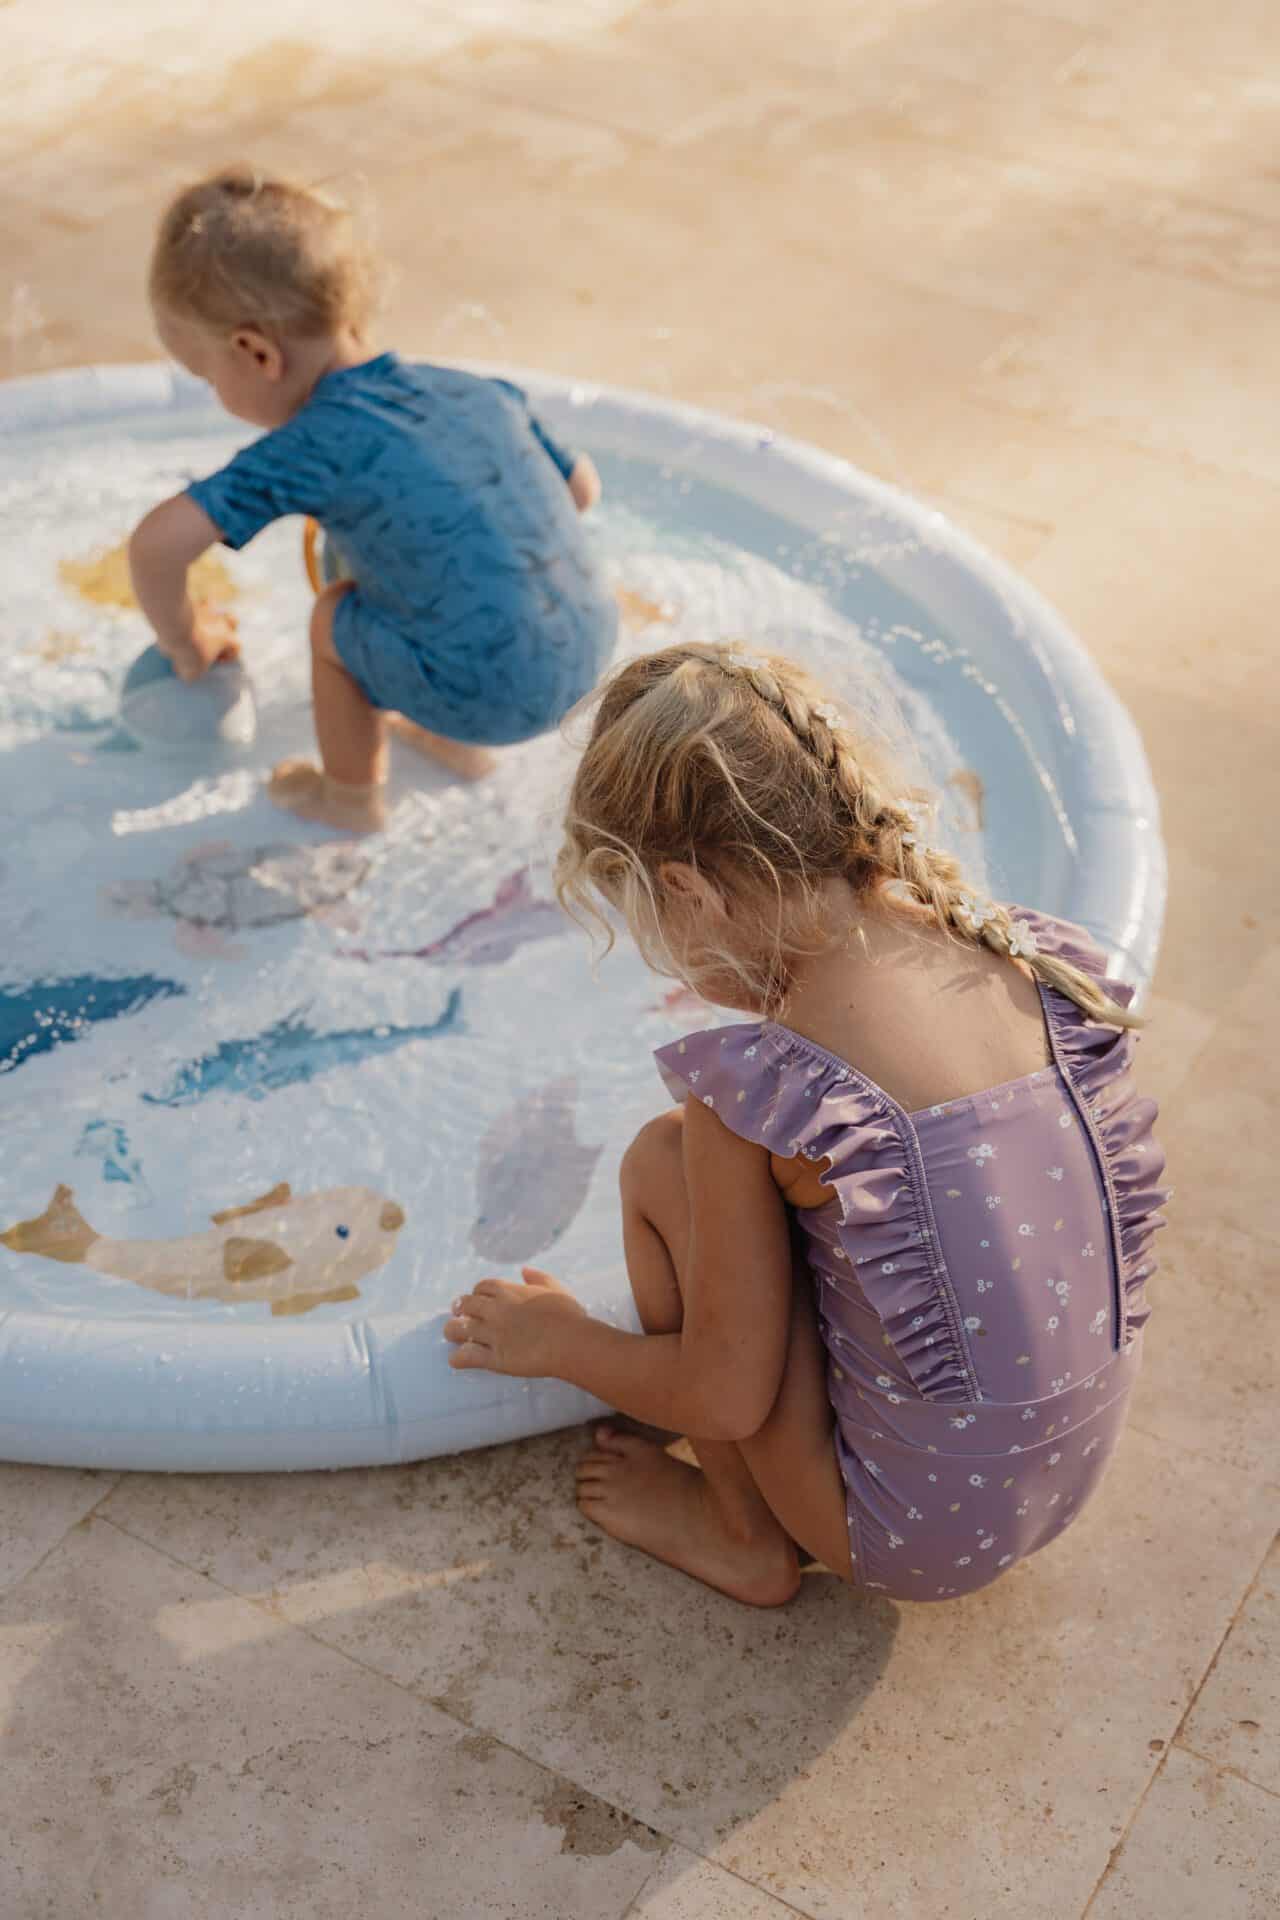 Girl wearing mauve Little Dutch swimsuit playing in a kiddie pool with another child.